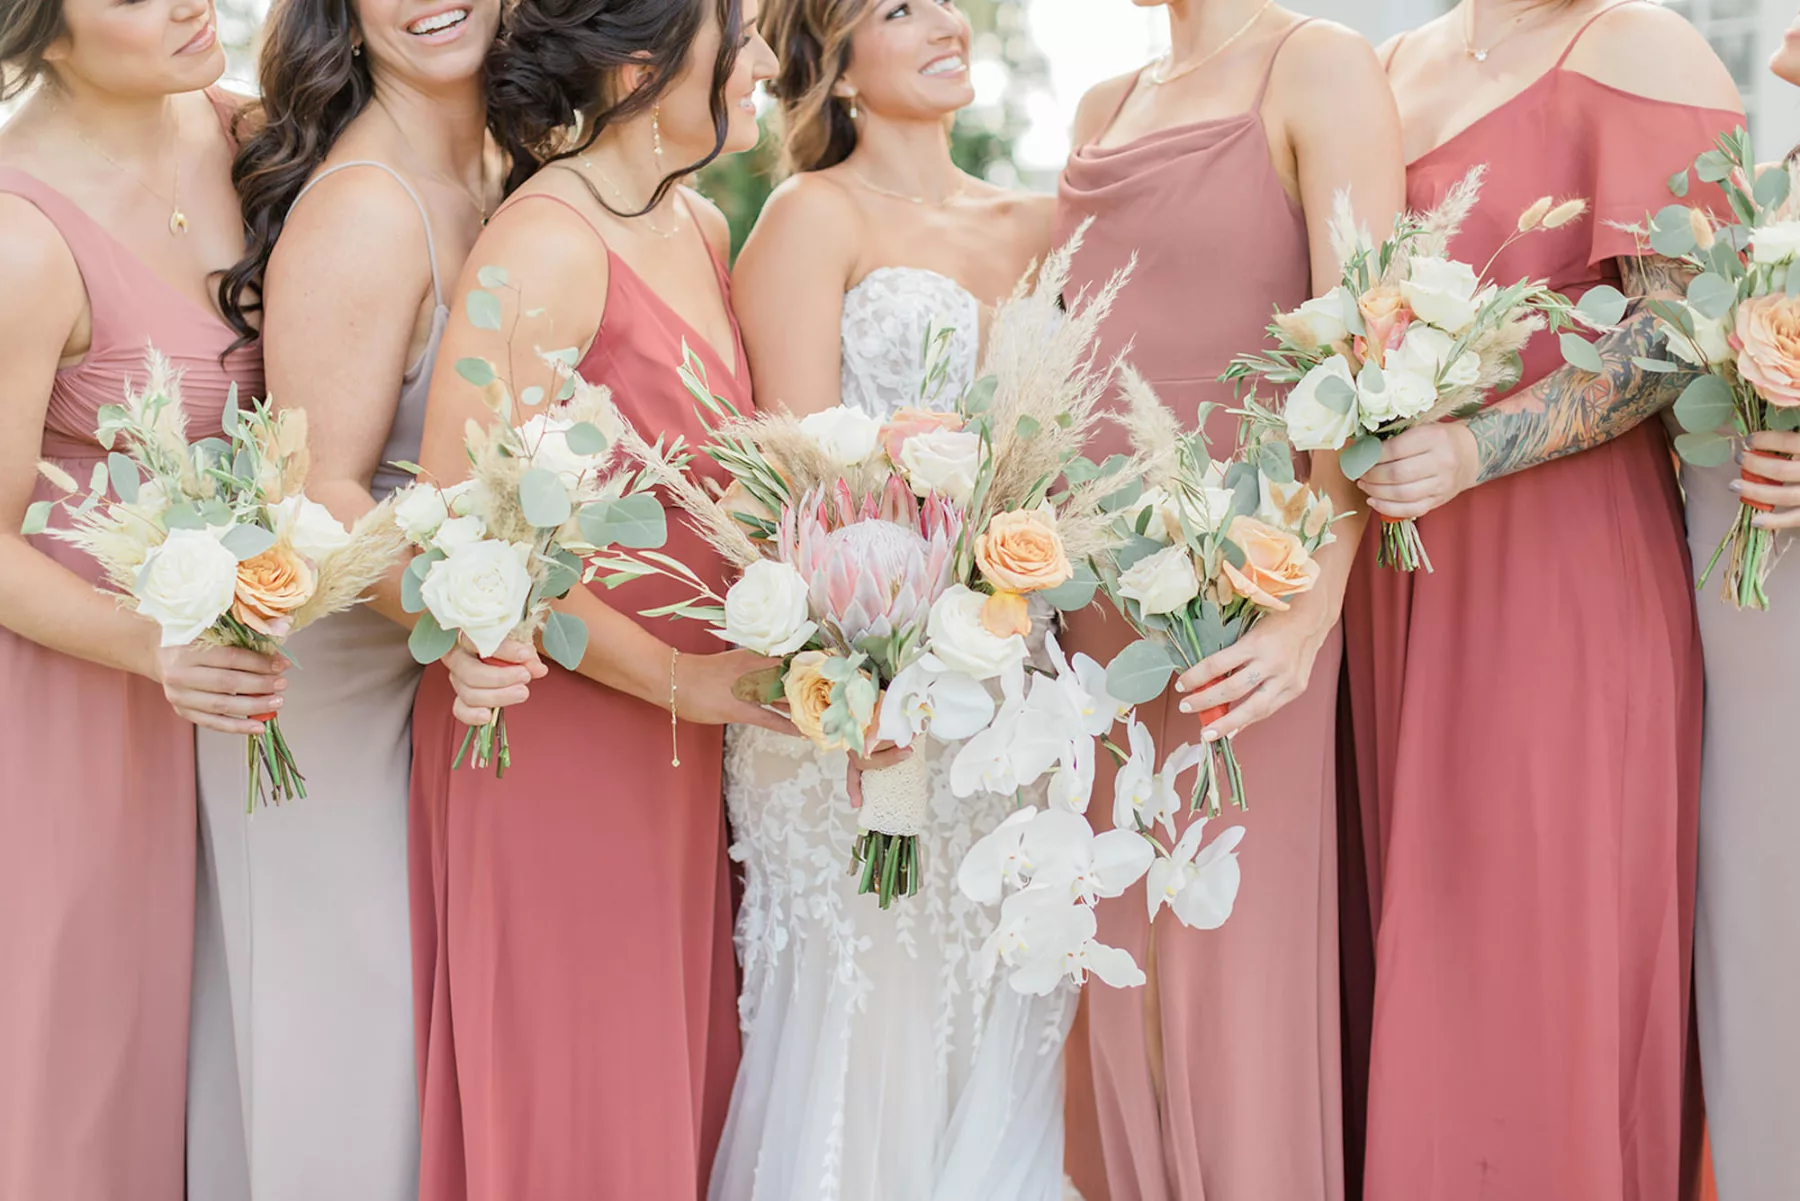 Mismatched Chiffon Floor Length Taupe, Dusty Rose, Terracotta Bridesmaid Dress Ideas | Boho Wedding Bouquets with Pampas Grass, White and Orange Roses, Pink King Protea, Orchids, and Eucalyptus Inspiration